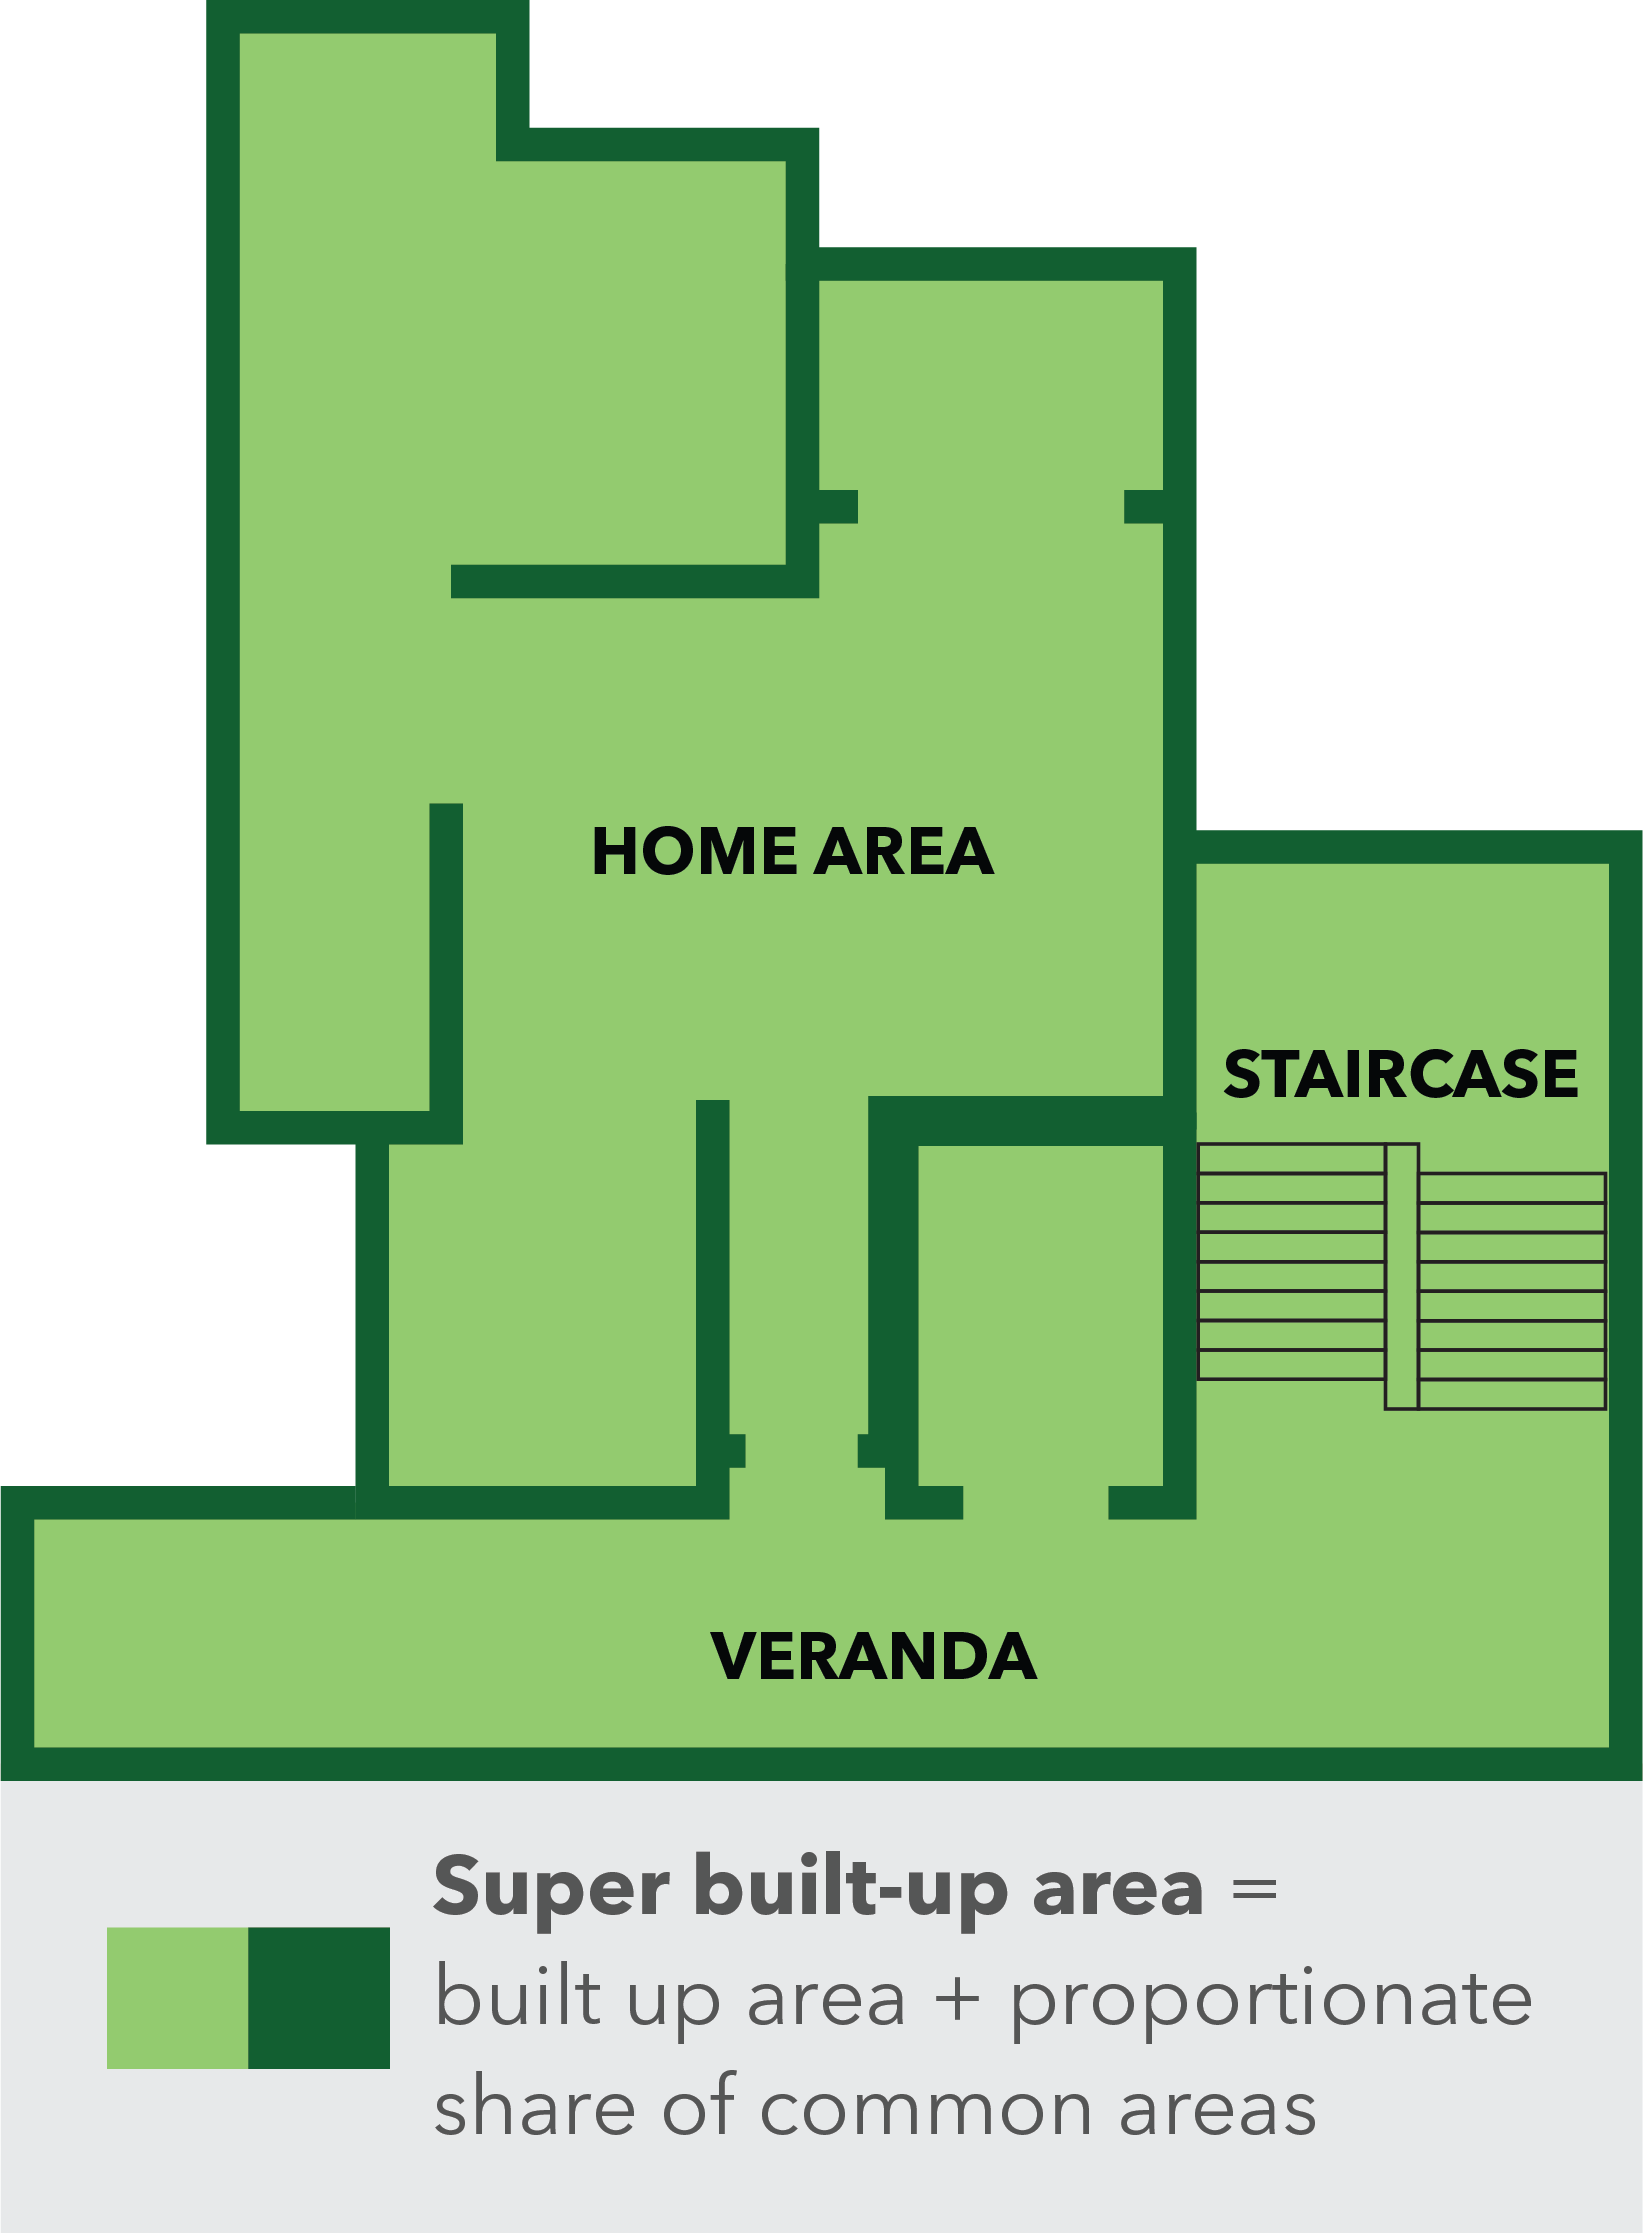 Super Built Up Area of a House